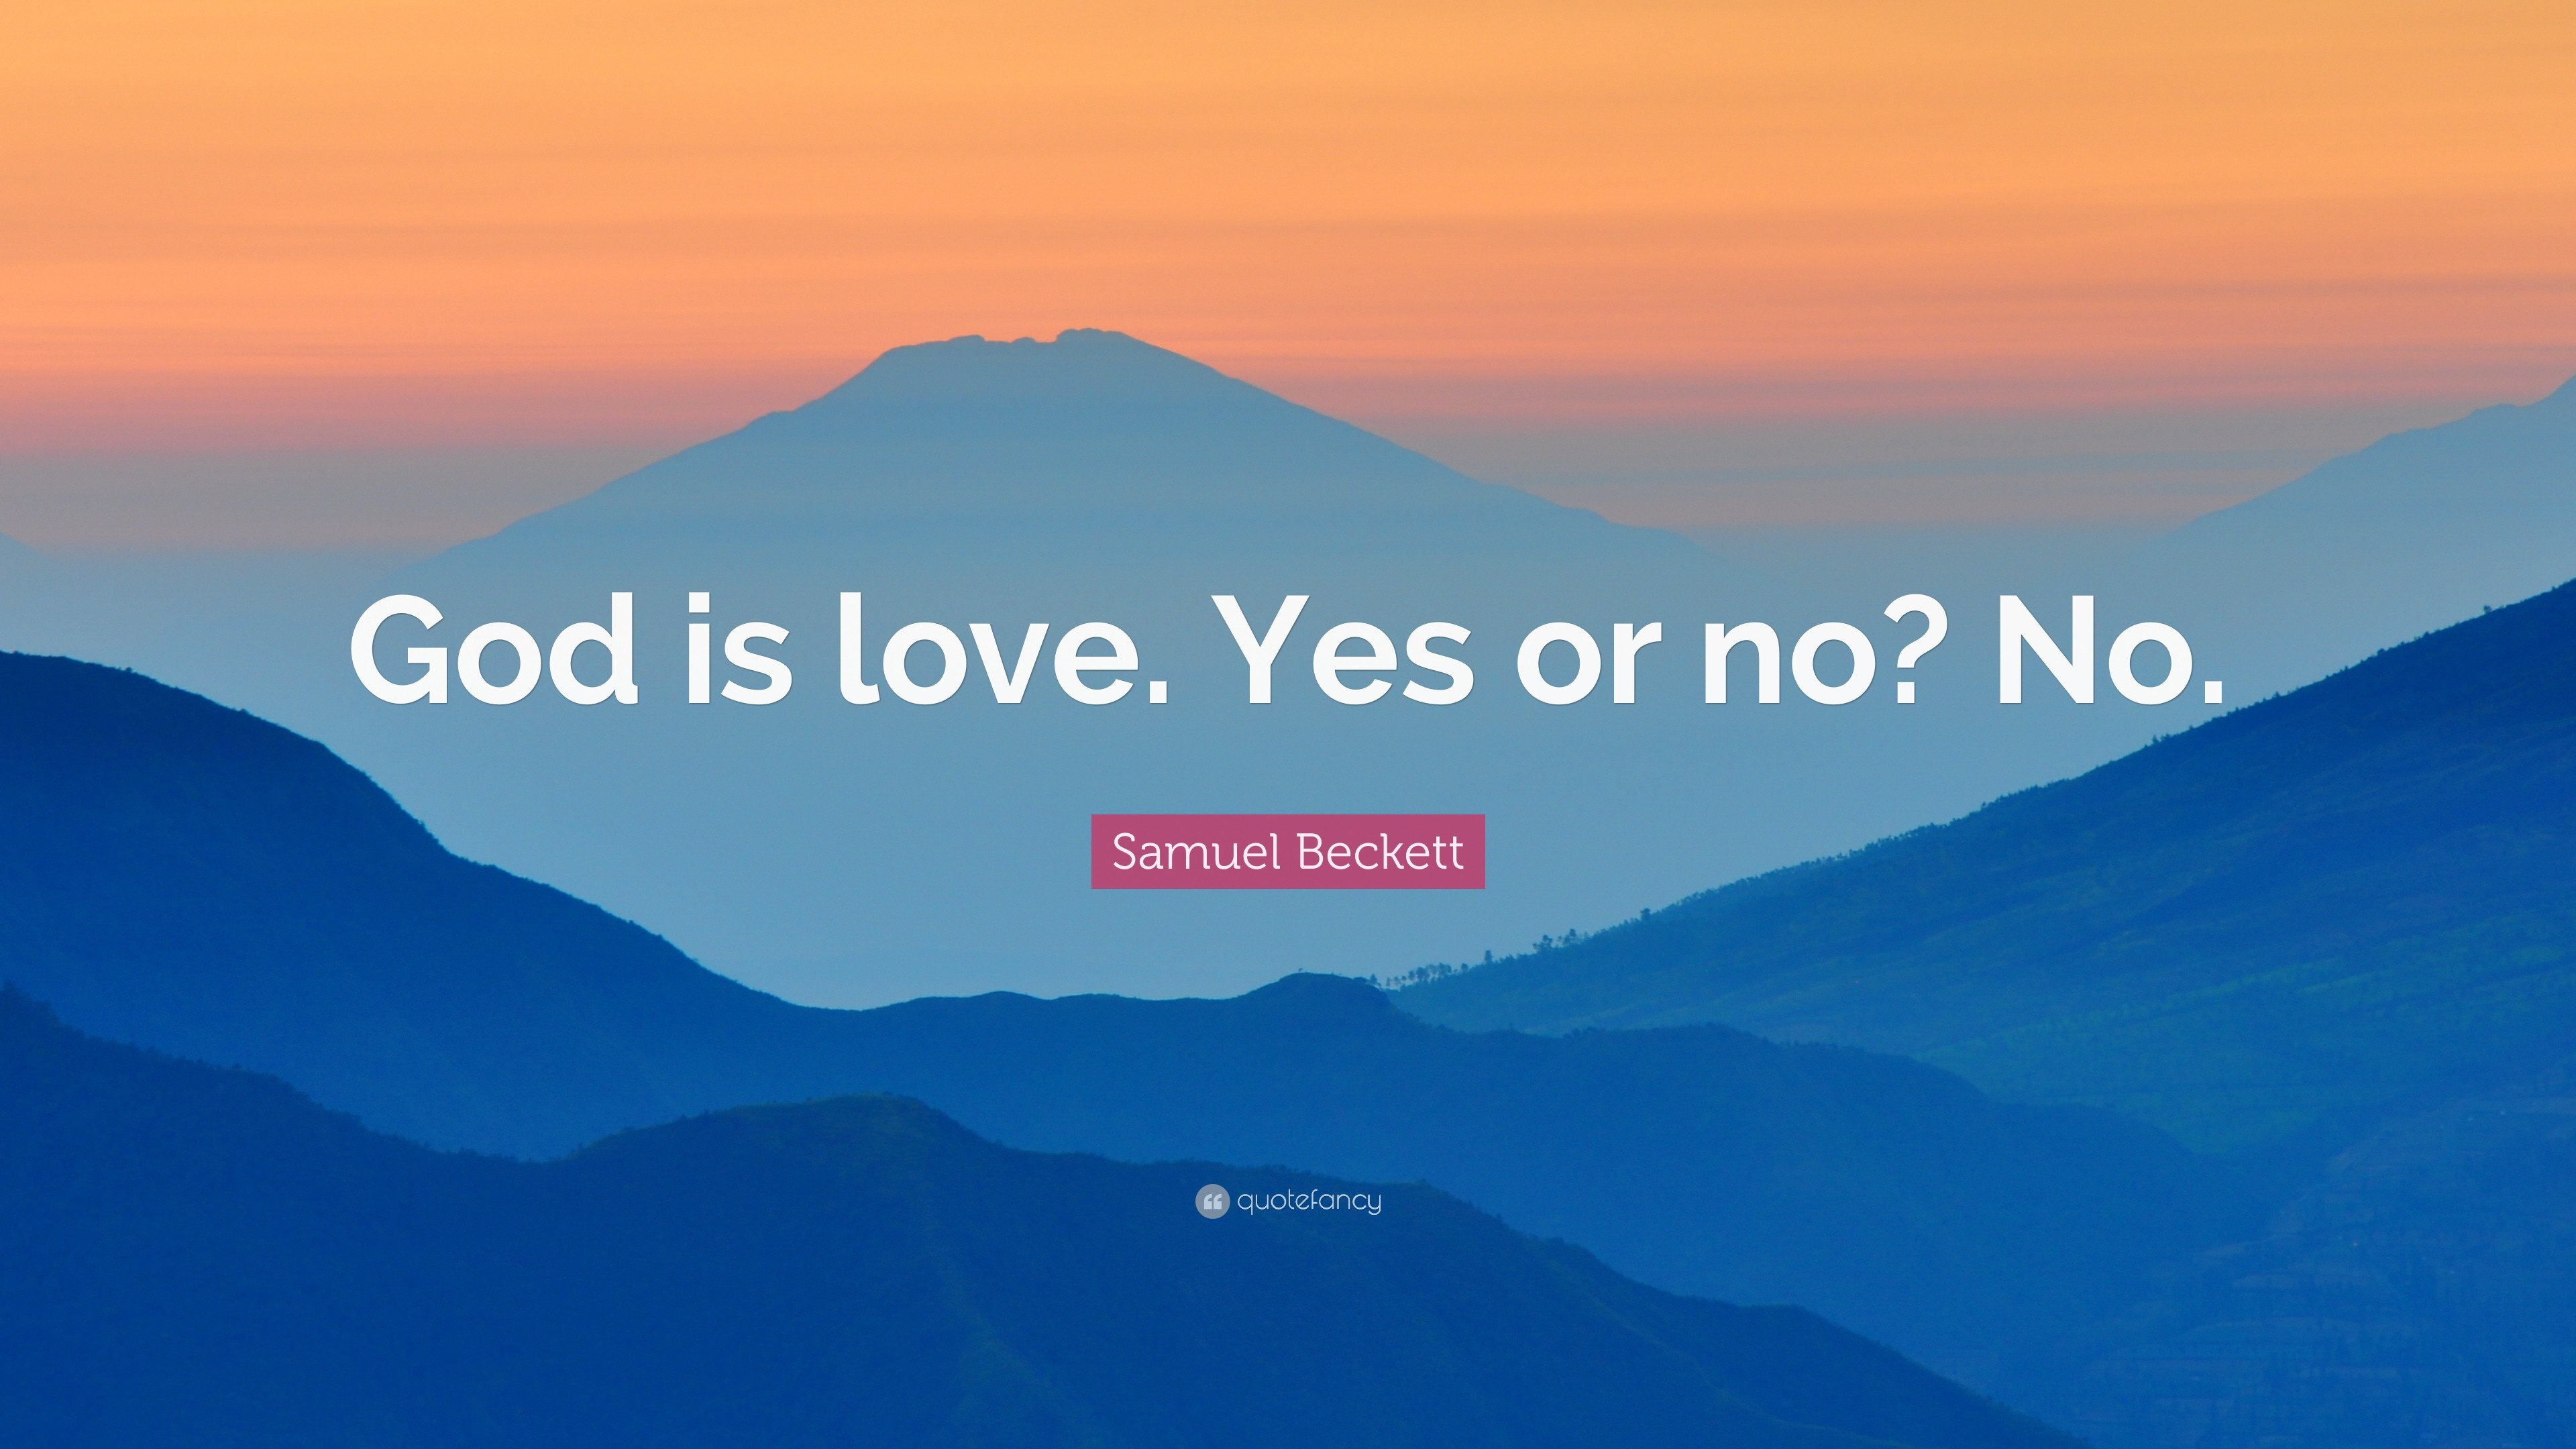 Samuel Beckett Quote God is love. Yes or no No.